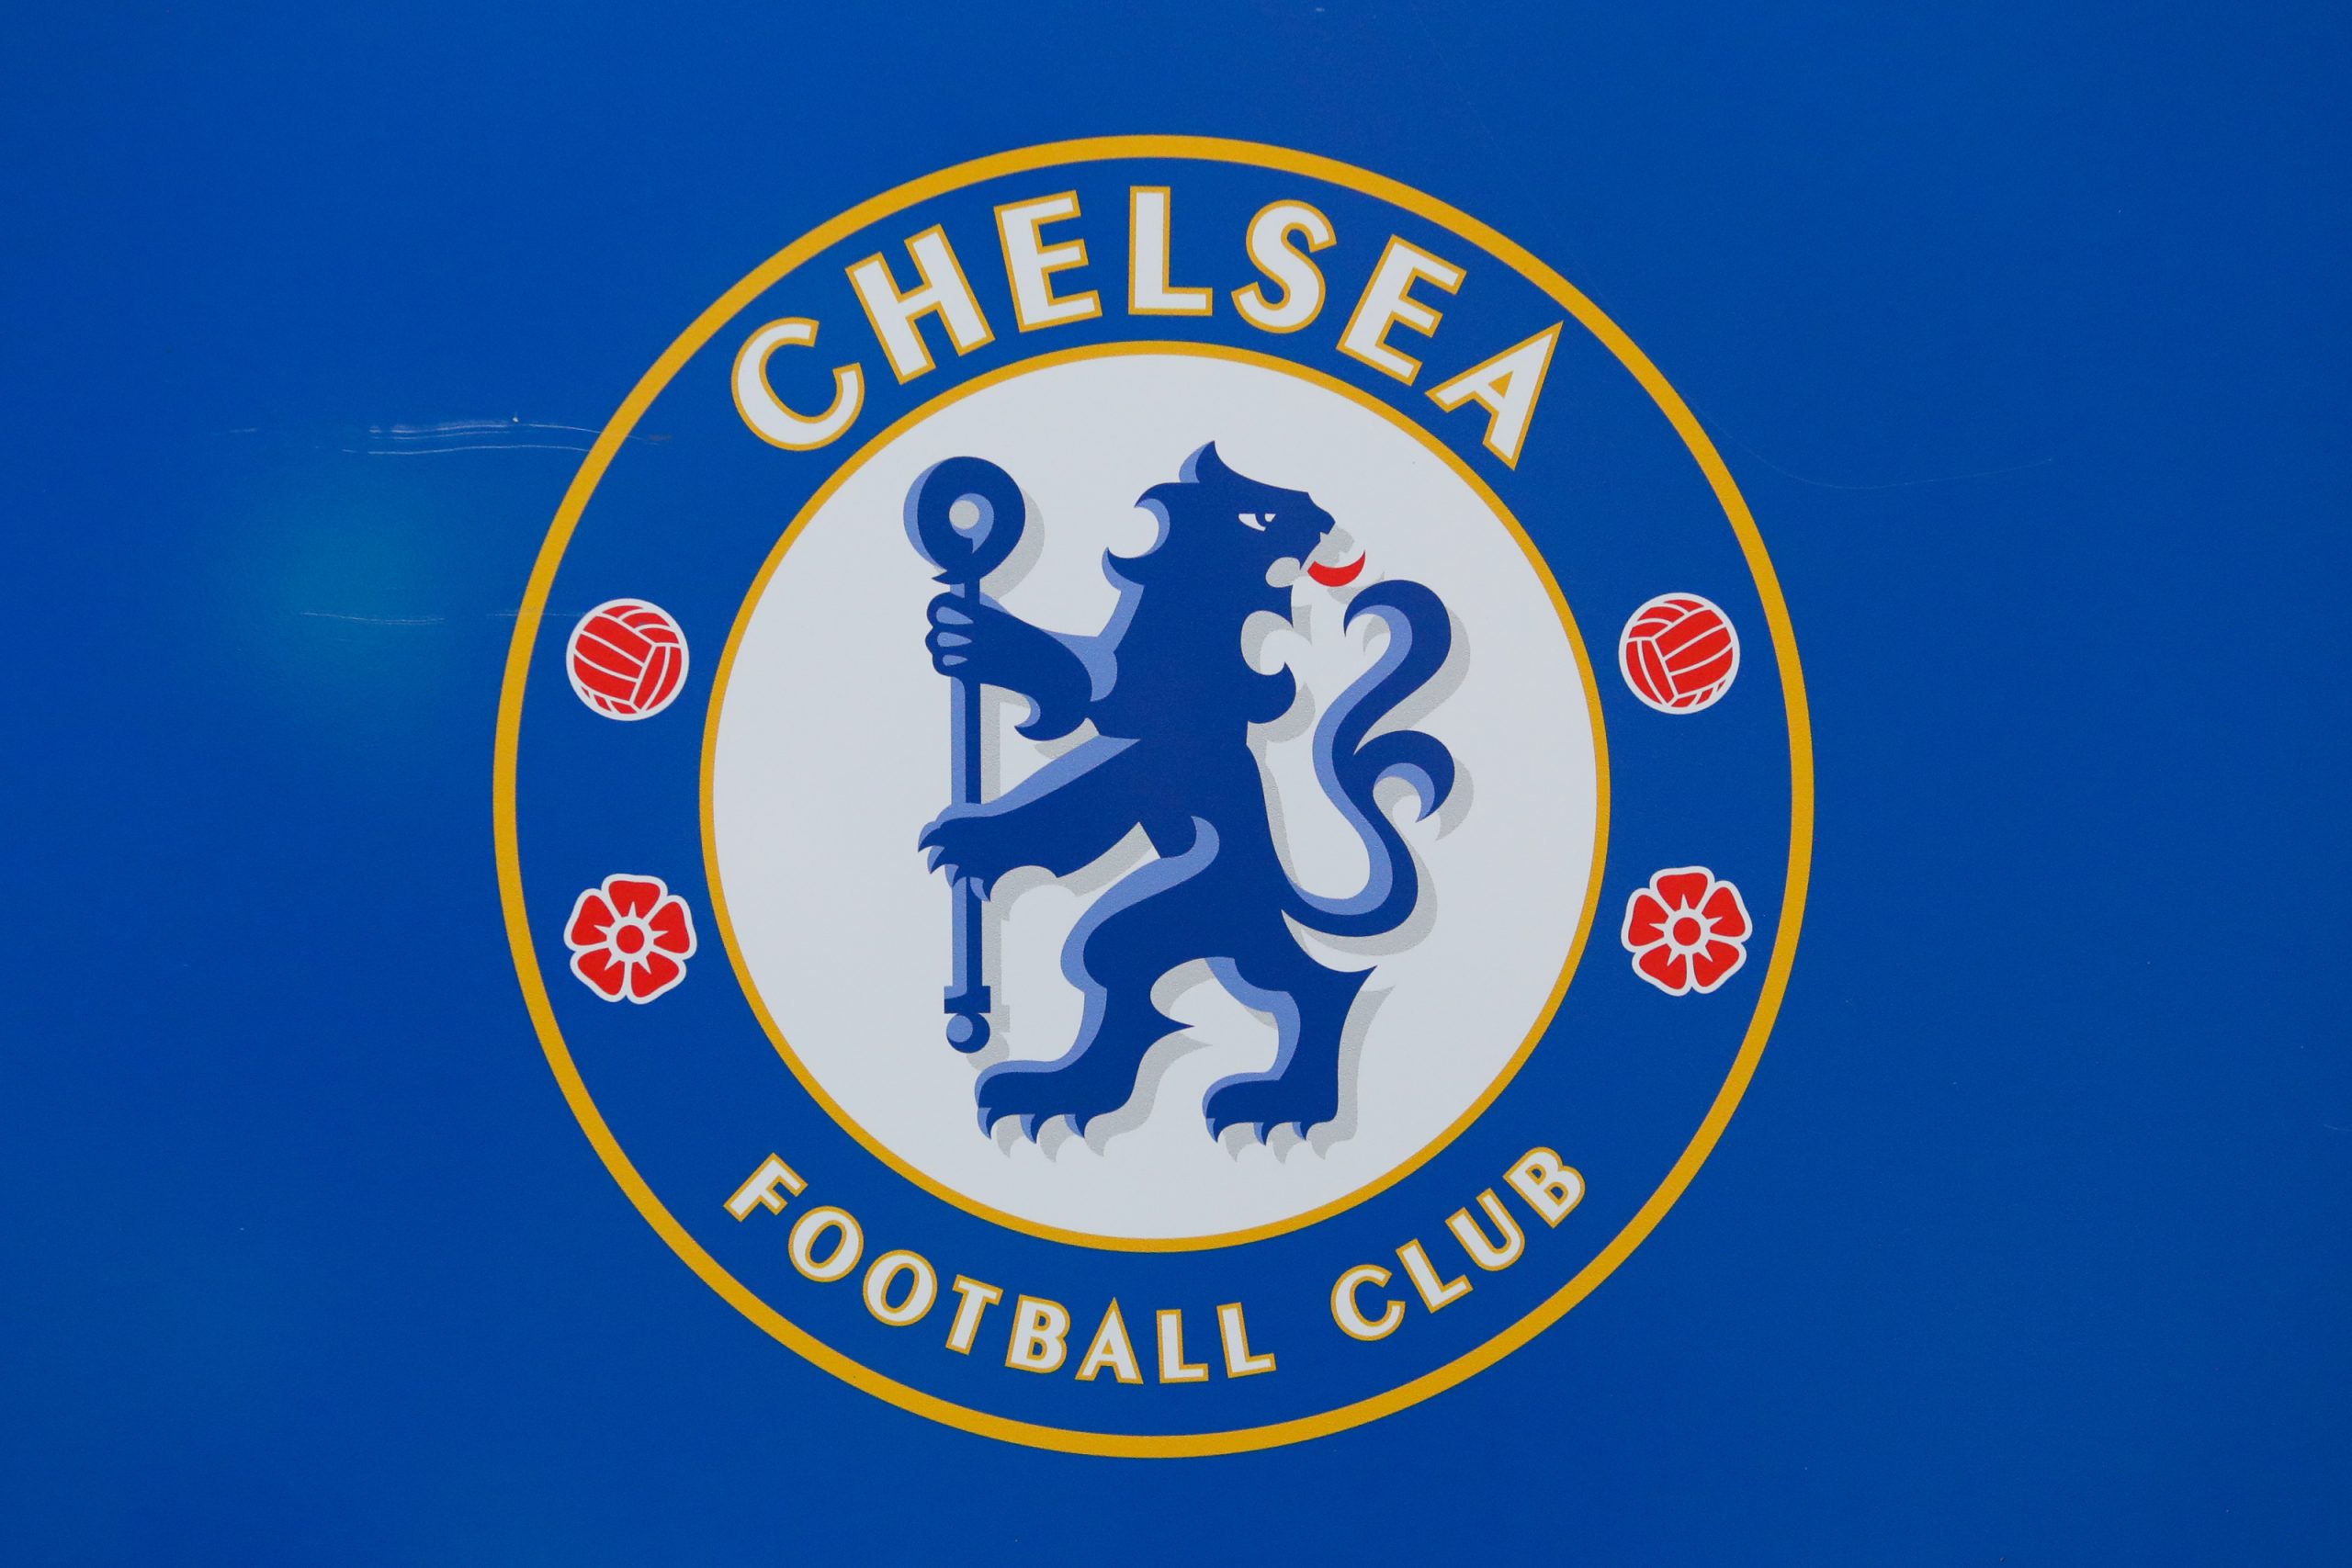 After Mason Mount, Another Chelsea Player Set To Leave - Deal Agreed